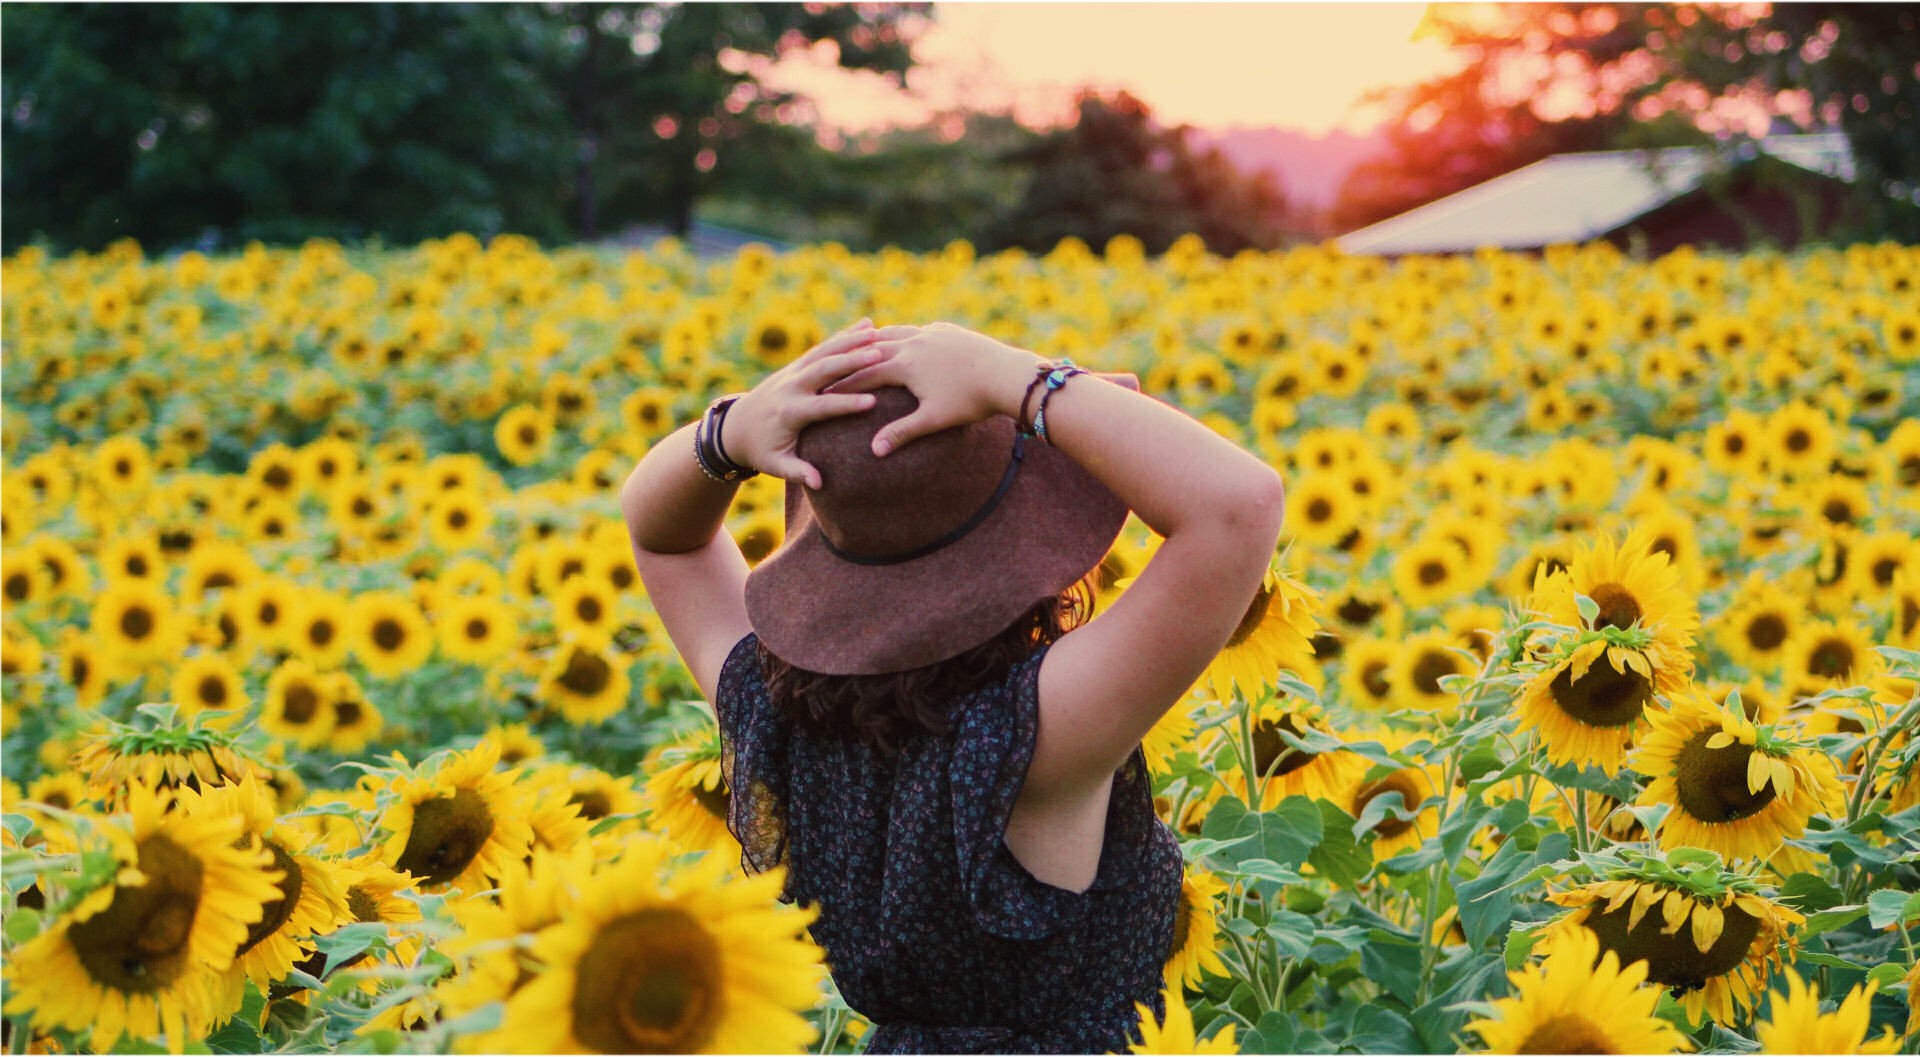 lady walking through a field of sunflowers